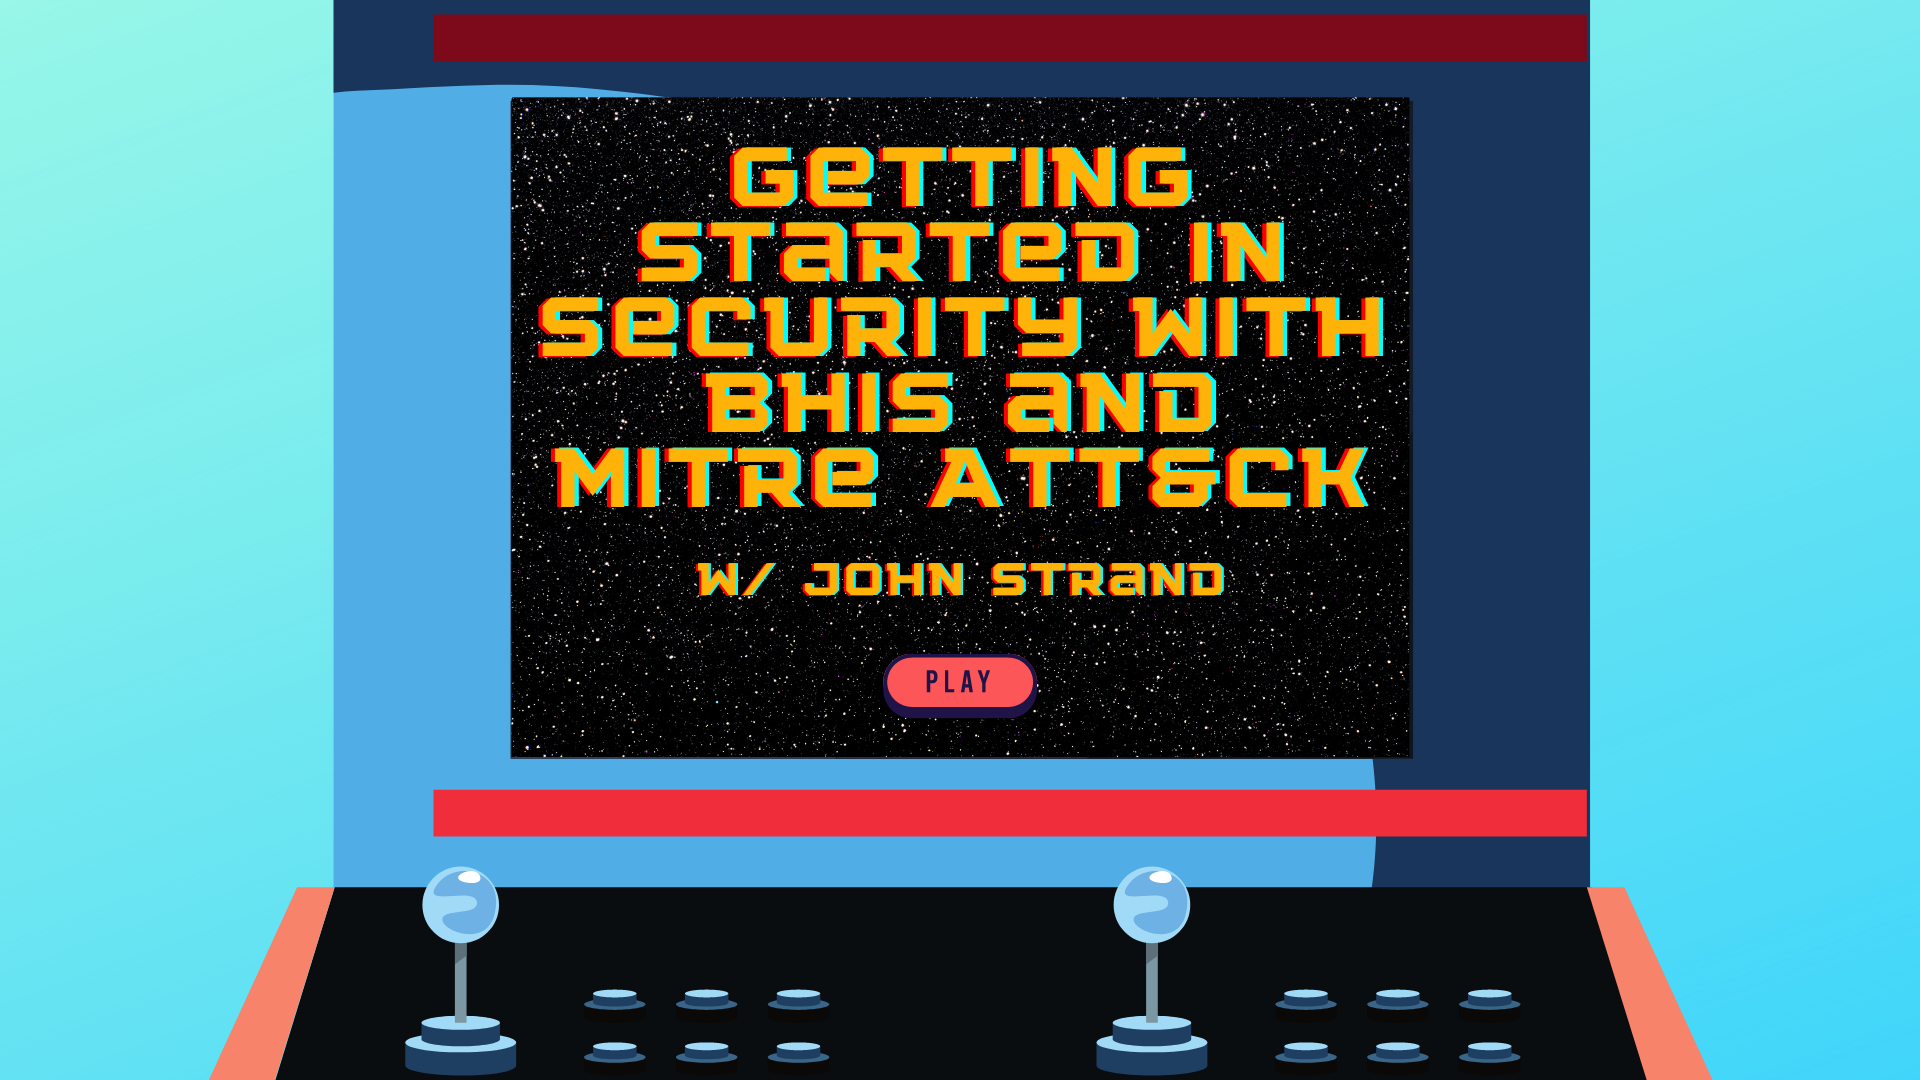 Getting Started in Security with BHIS and MITRE ATT&CK